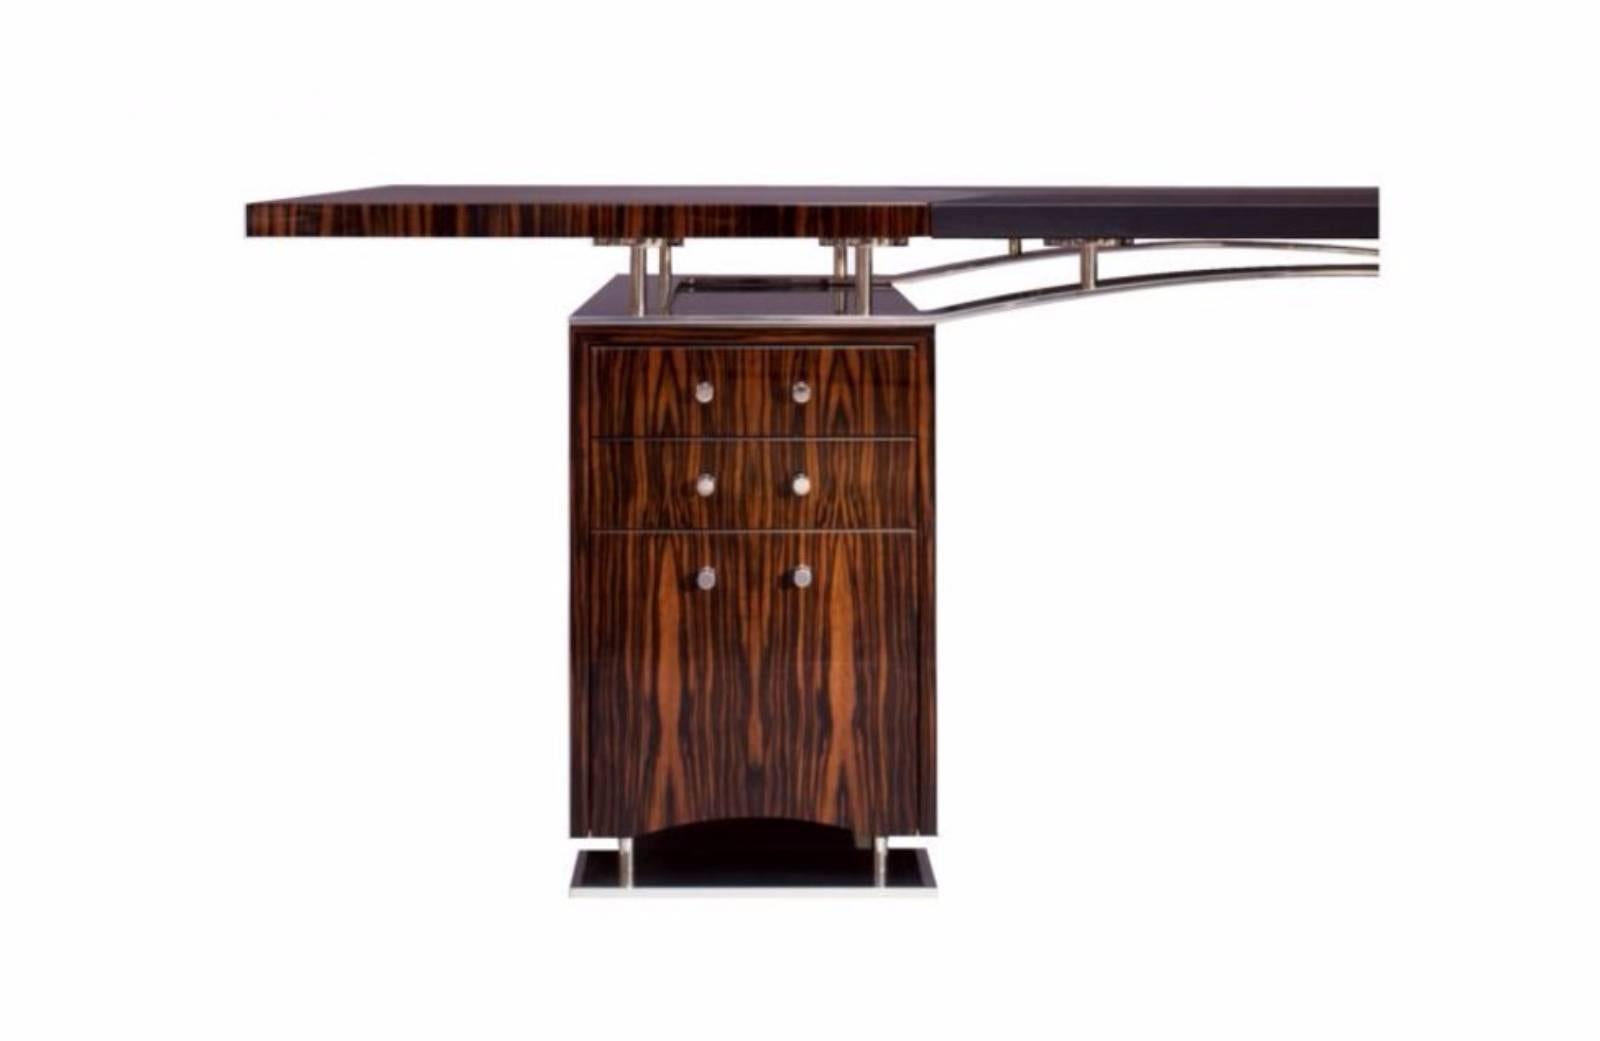 This is simply the most beautiful desk I have ever owned and I have owned hundreds of desks. Dakota Jackson French polished ebony Macassar Art Deco style Executive desk. Partner’s desk model. Retails at 35K w taxes and shipping. Still in production